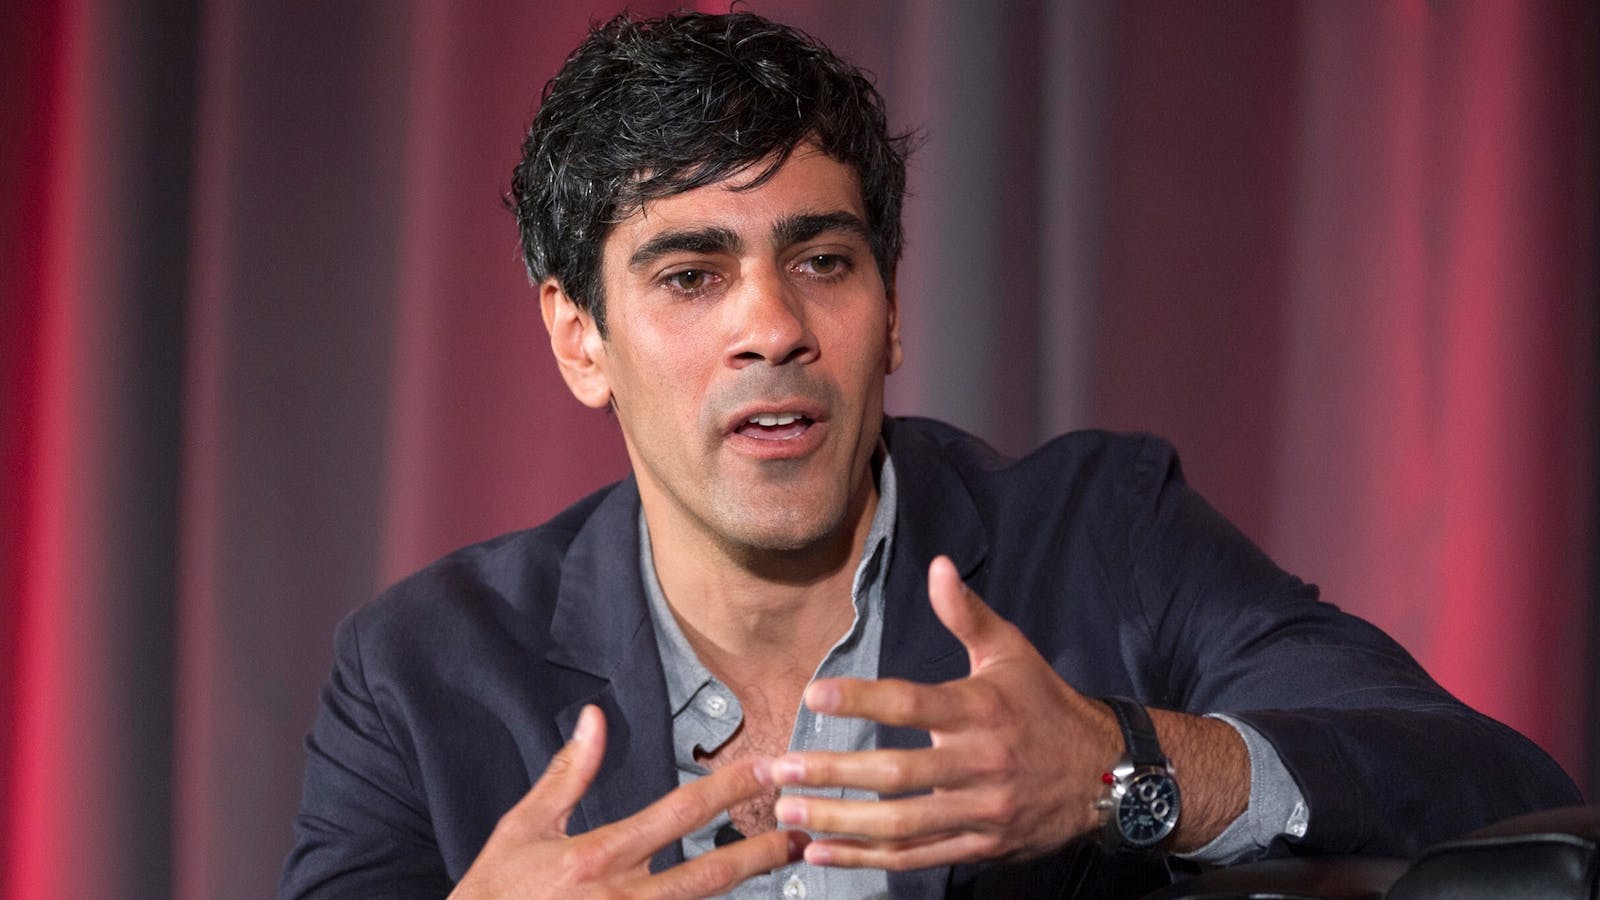 Yelp CEO Jeremy Stoppelman. Photo by Bloomberg.